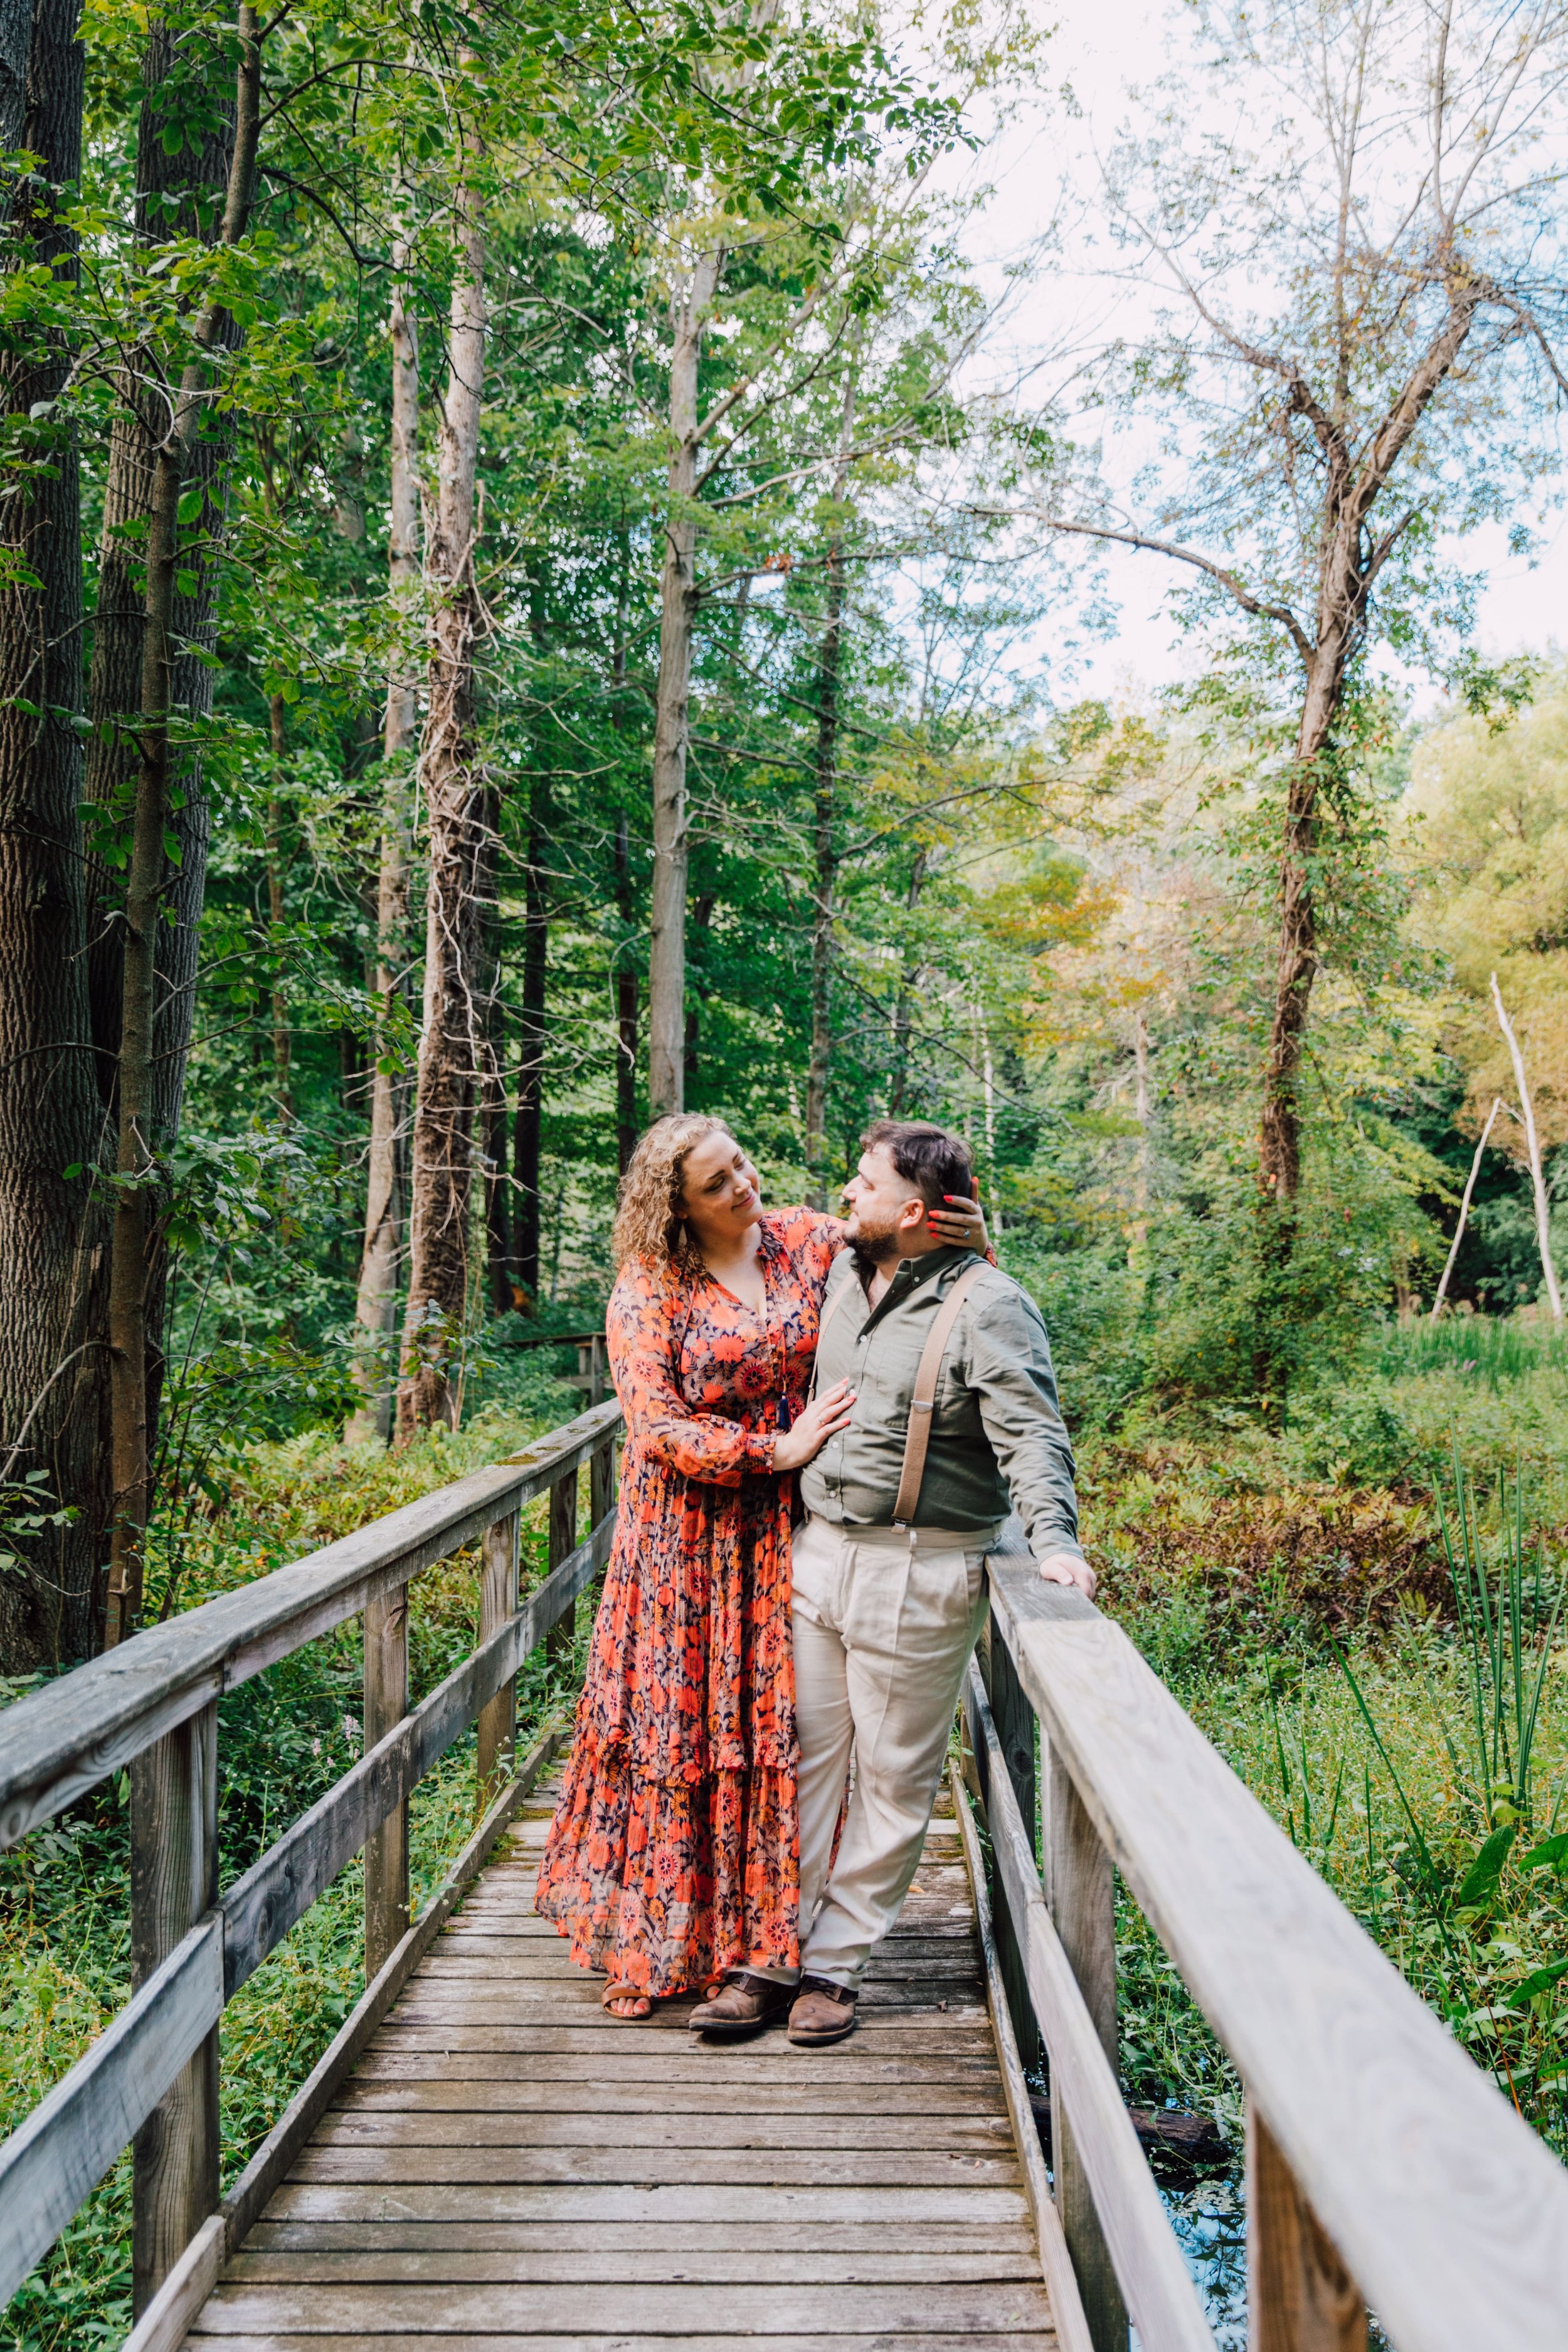  central new york photographer captures forest engagement photos for a couple as they stand on a wooden bridge over a forest area and smile at each other 